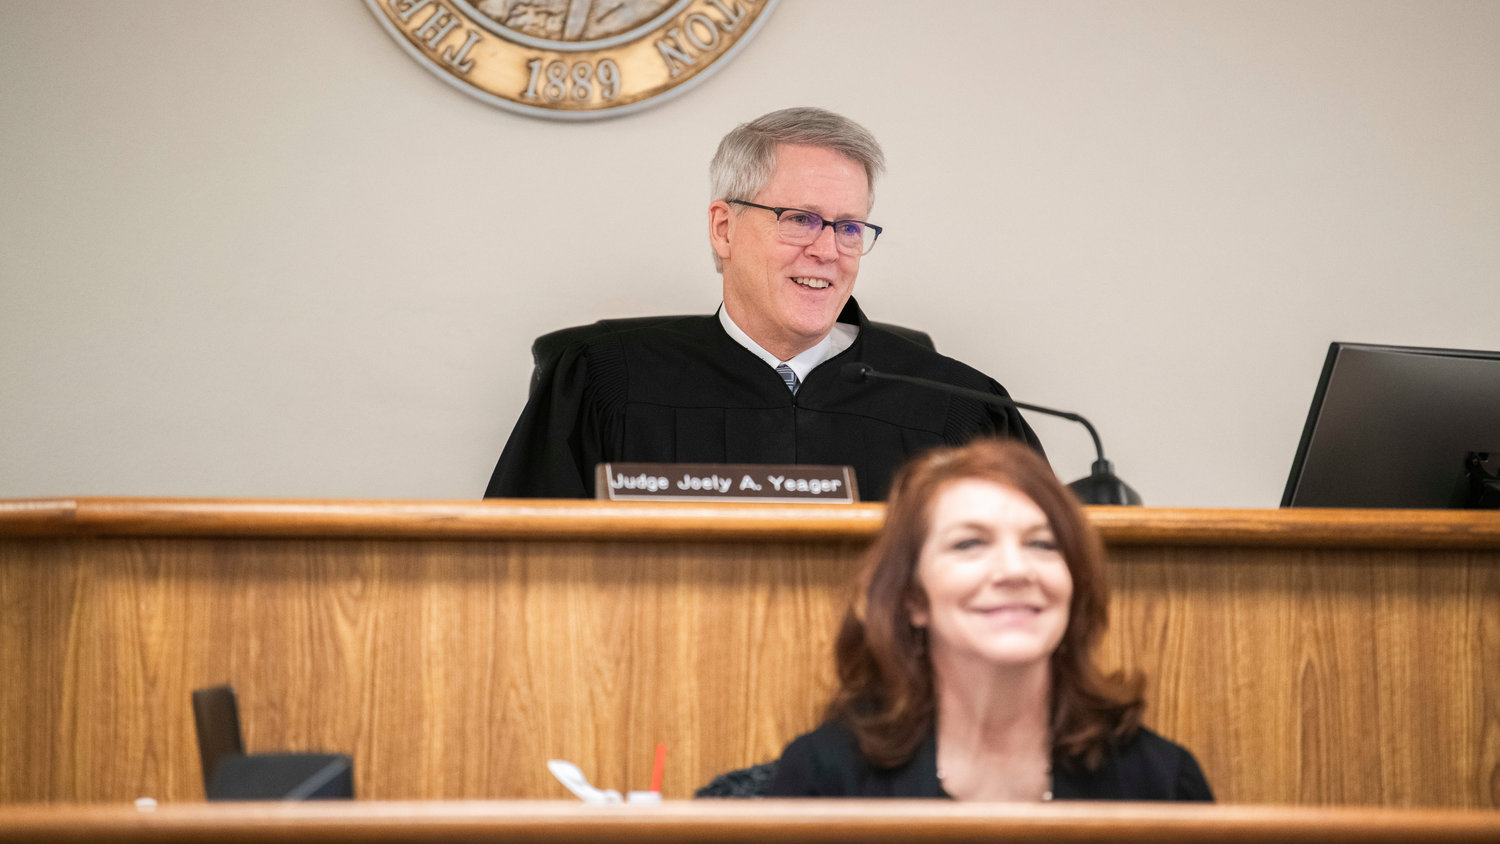 Judge James W. Lawler smiles while congratulating Charlotte Sharon Norton on successfully completing the Mental Health Court Program on Thursday in Lewis County Superior Court.